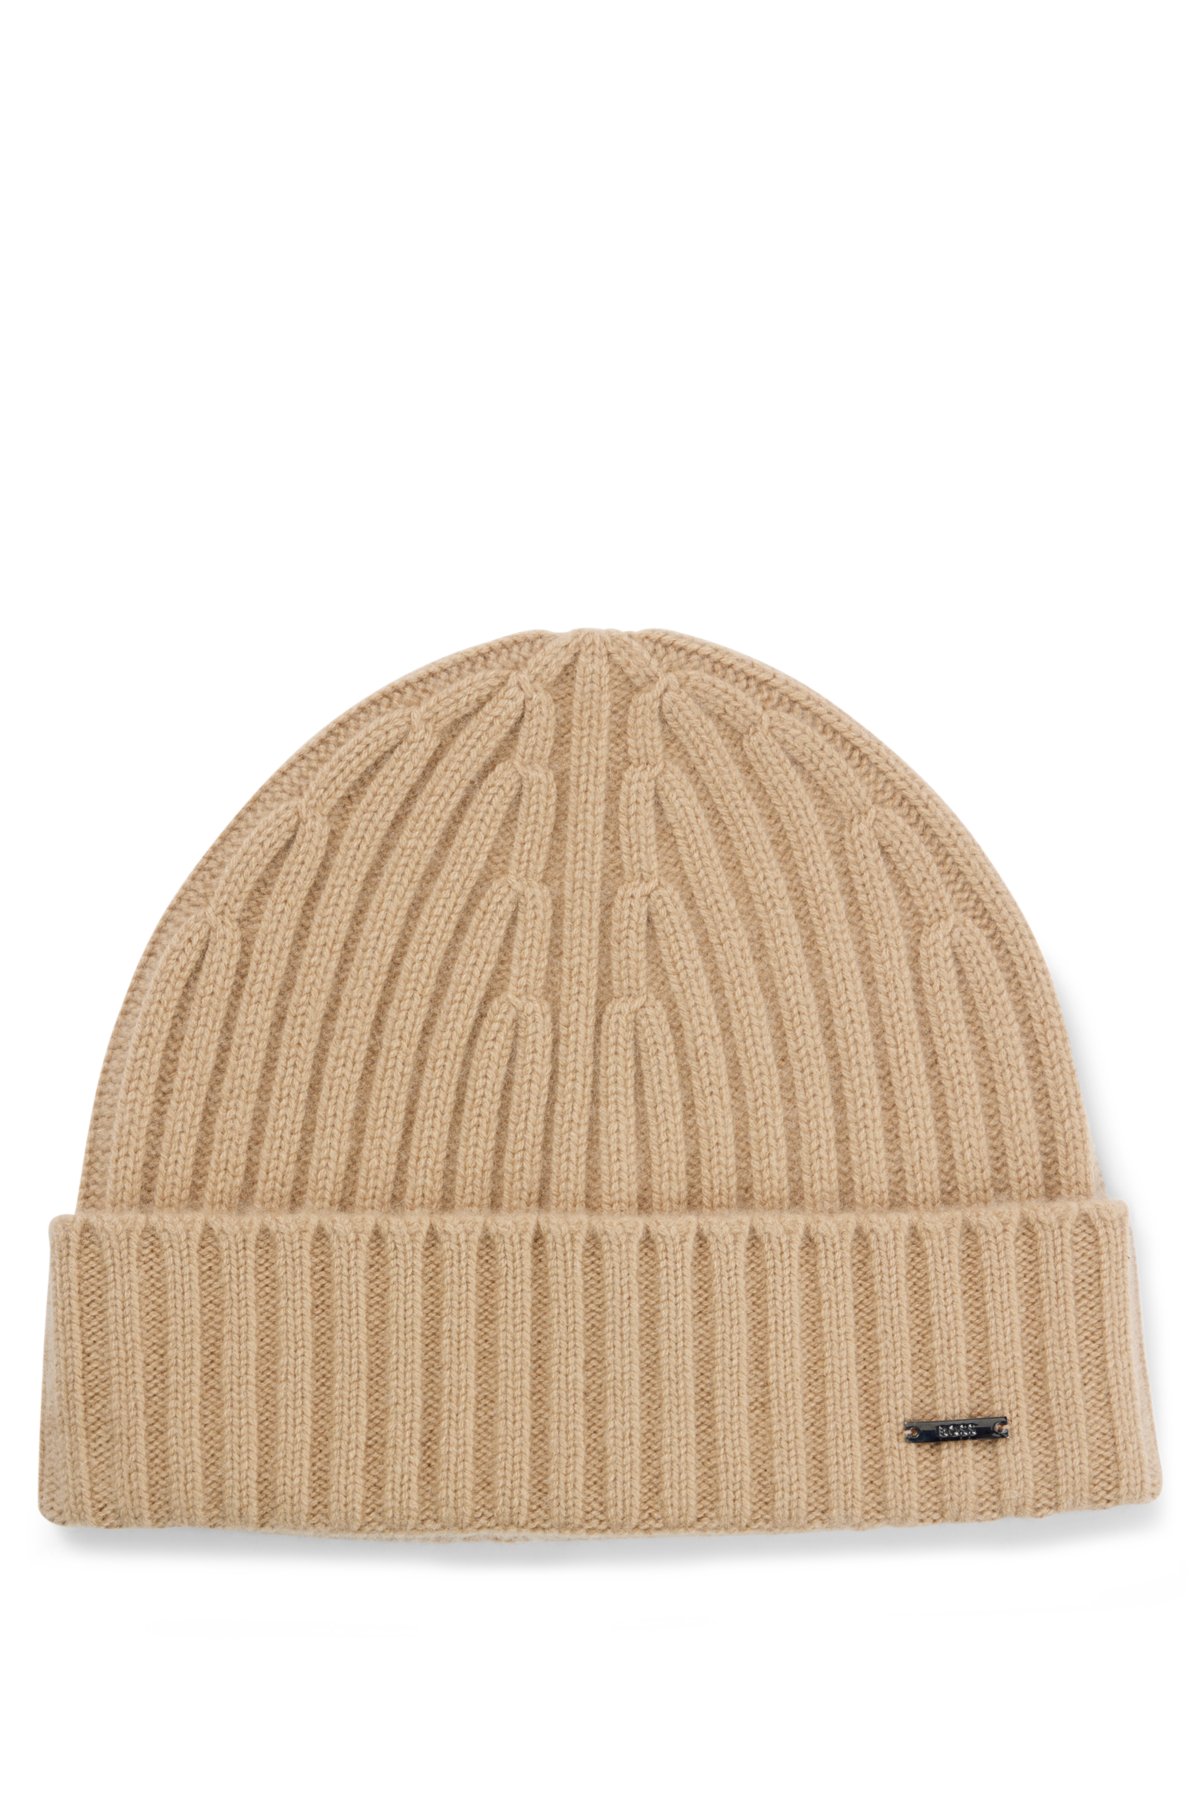 Boss Men's Ribbed Beanie Hat in Cashmere - Natural - Hats